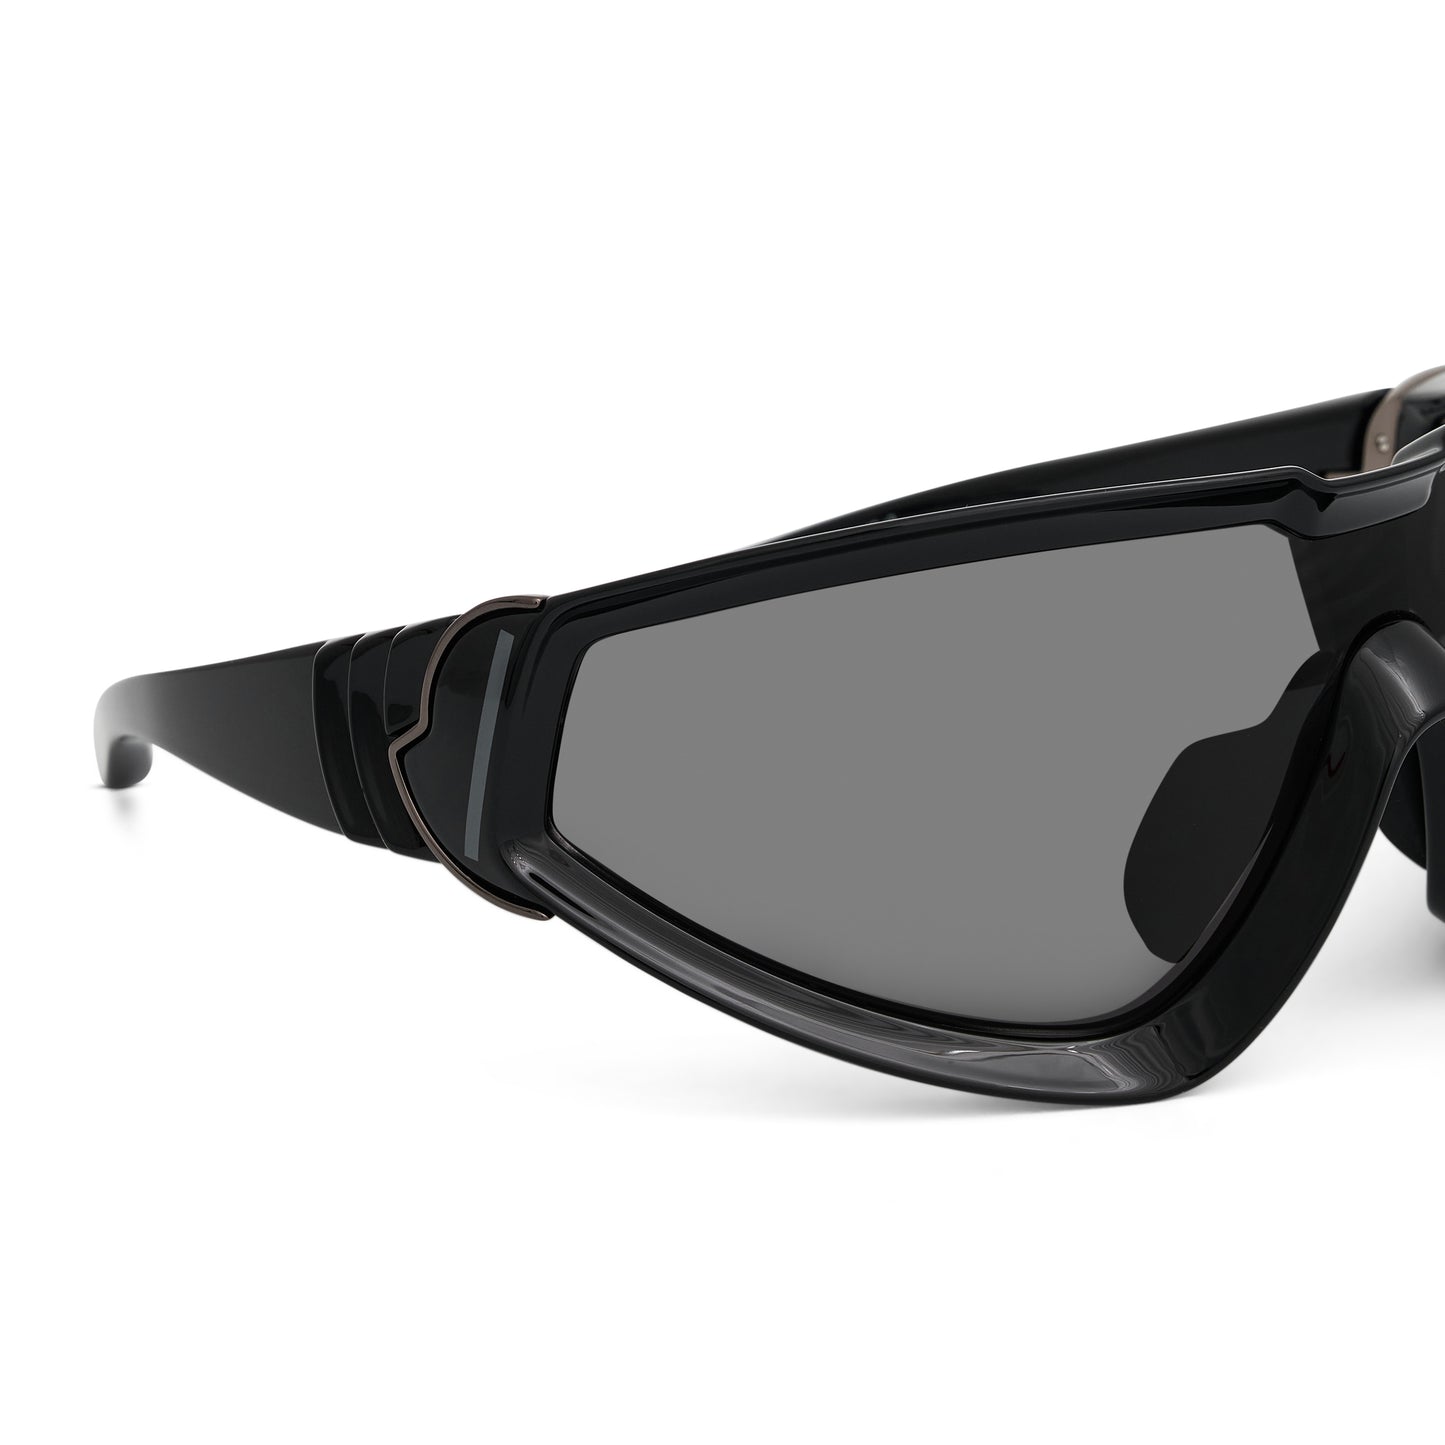 Moncler x Rick Owens Wrapid Sunglasses in Black